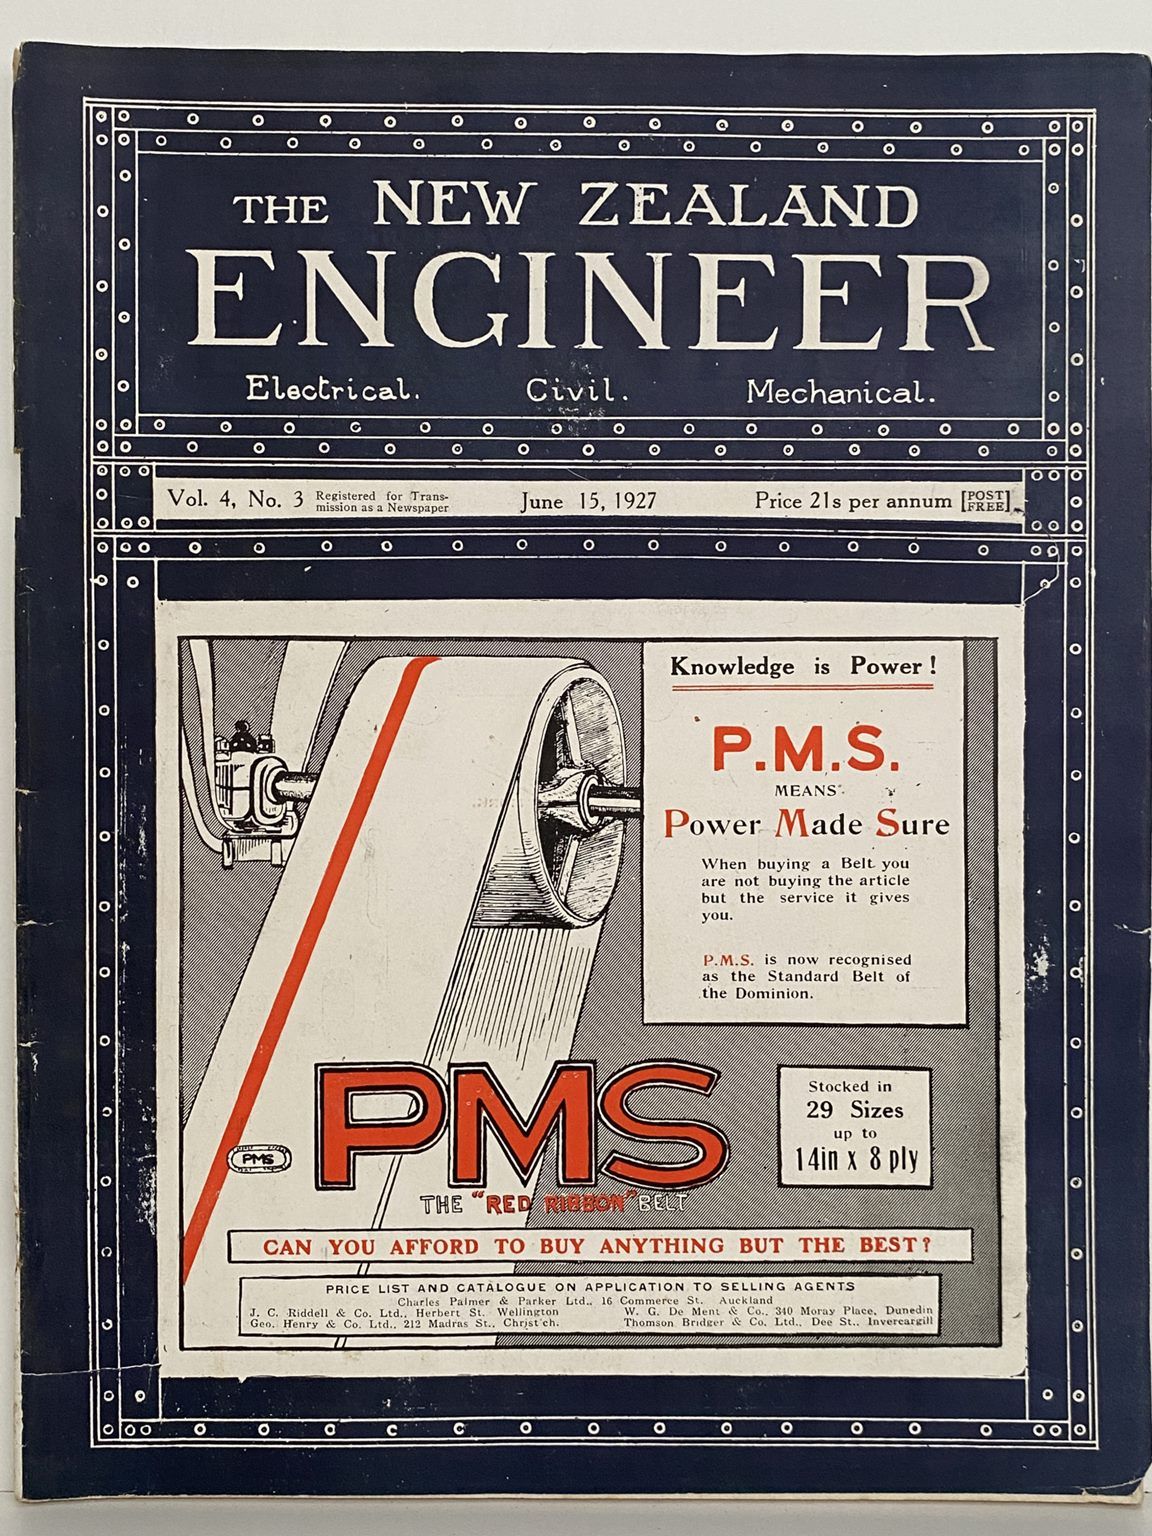 OLD MAGAZINE: The New Zealand Engineer Vol. 3, No. 5 - 16 August 1926